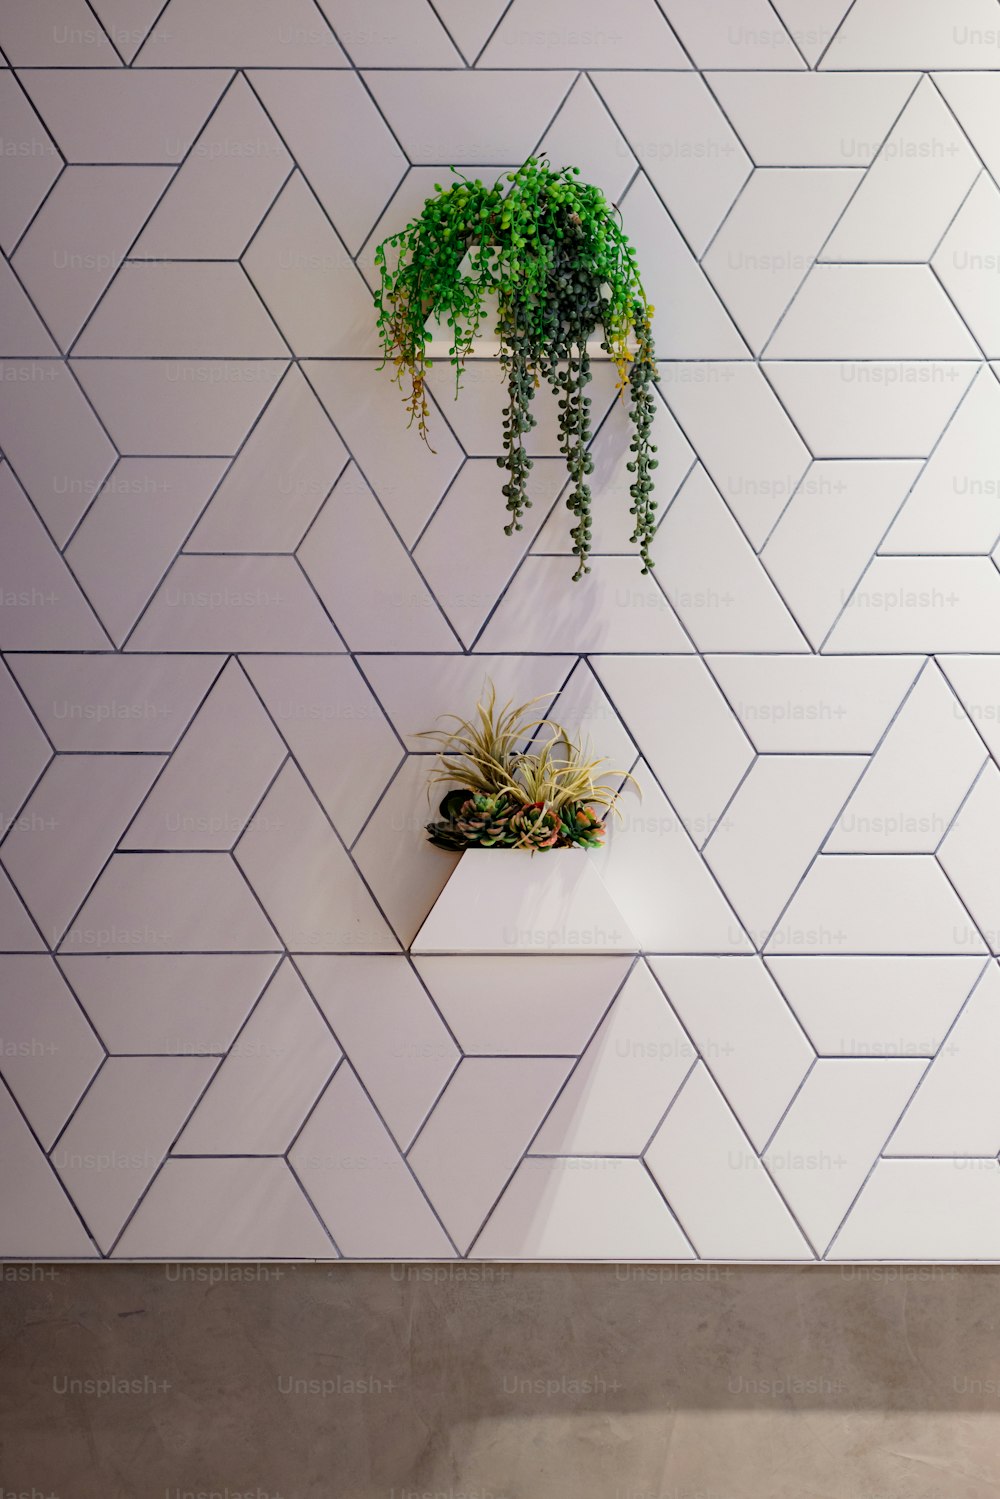 Geometric Patterns Pictures | Download Free Images on Unsplash